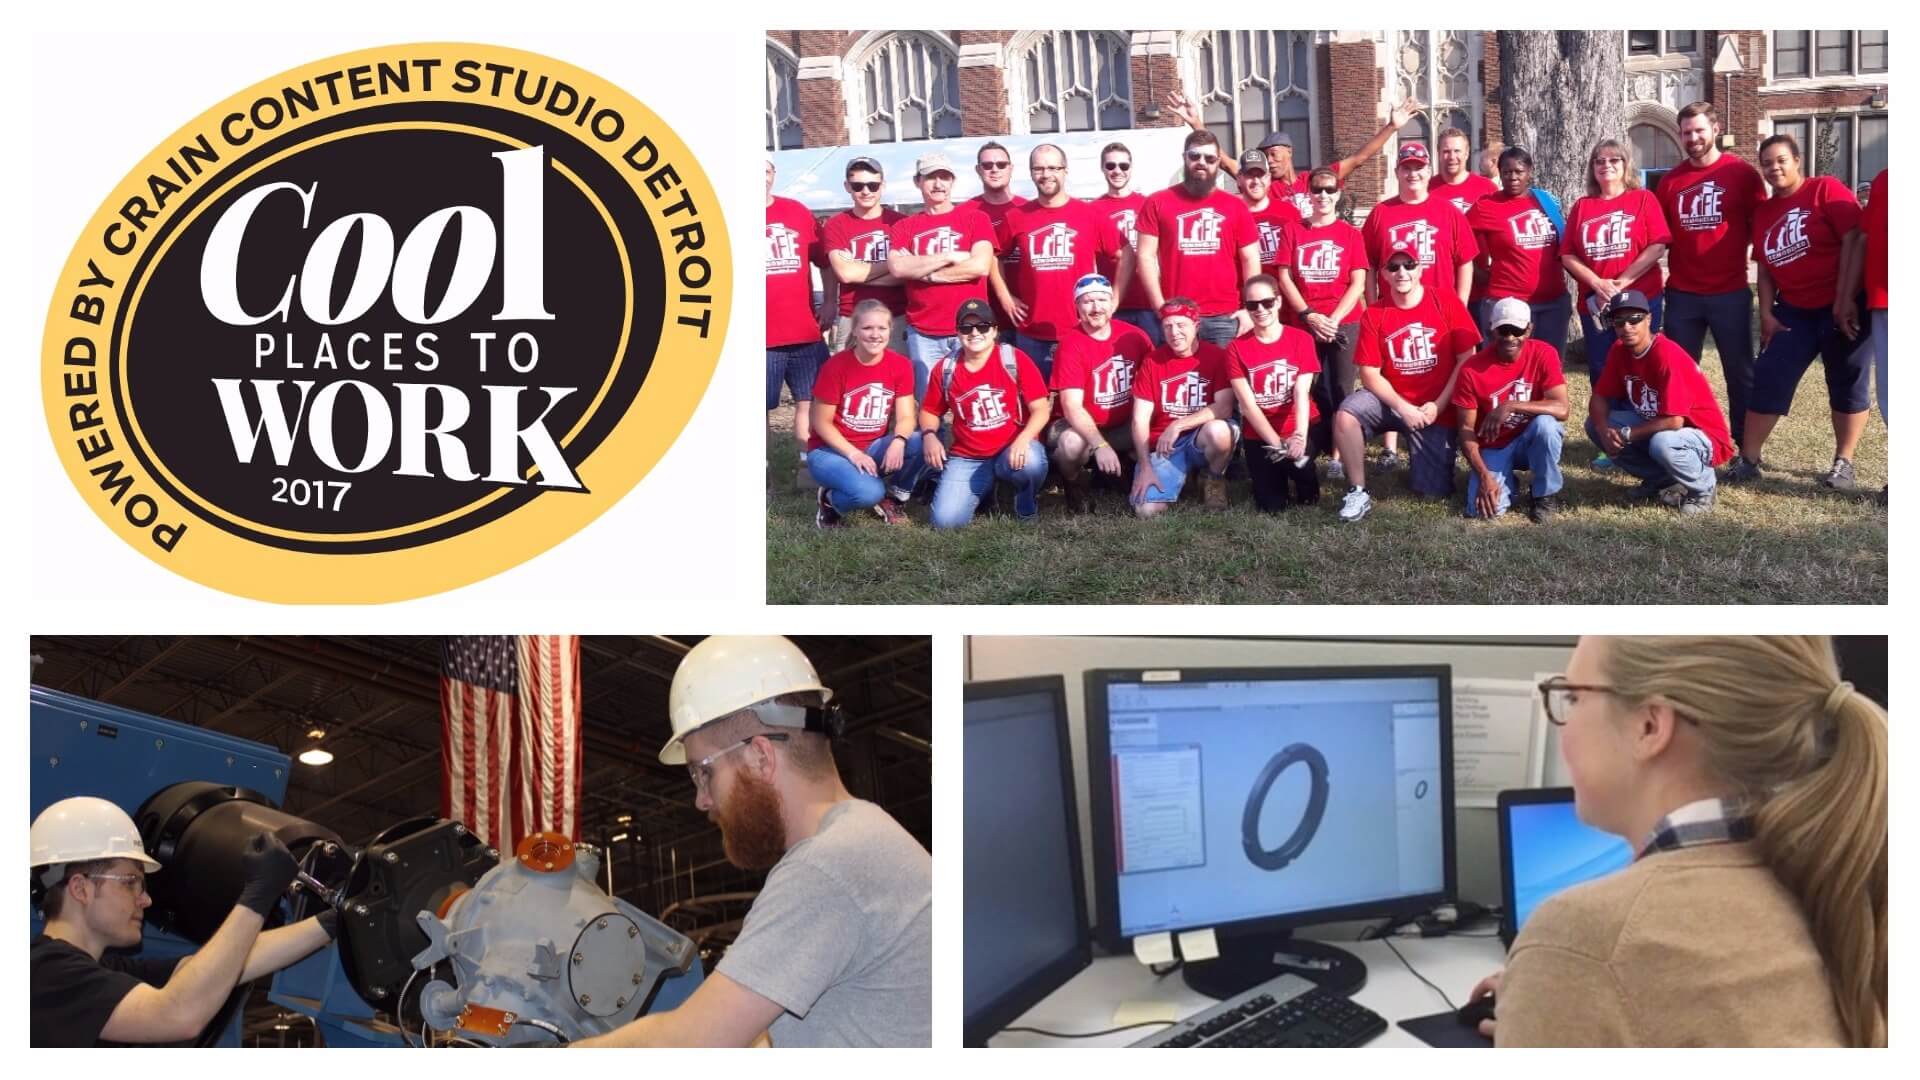 RedViking Honored As “Cool Place To Work” Second Year in a Row!